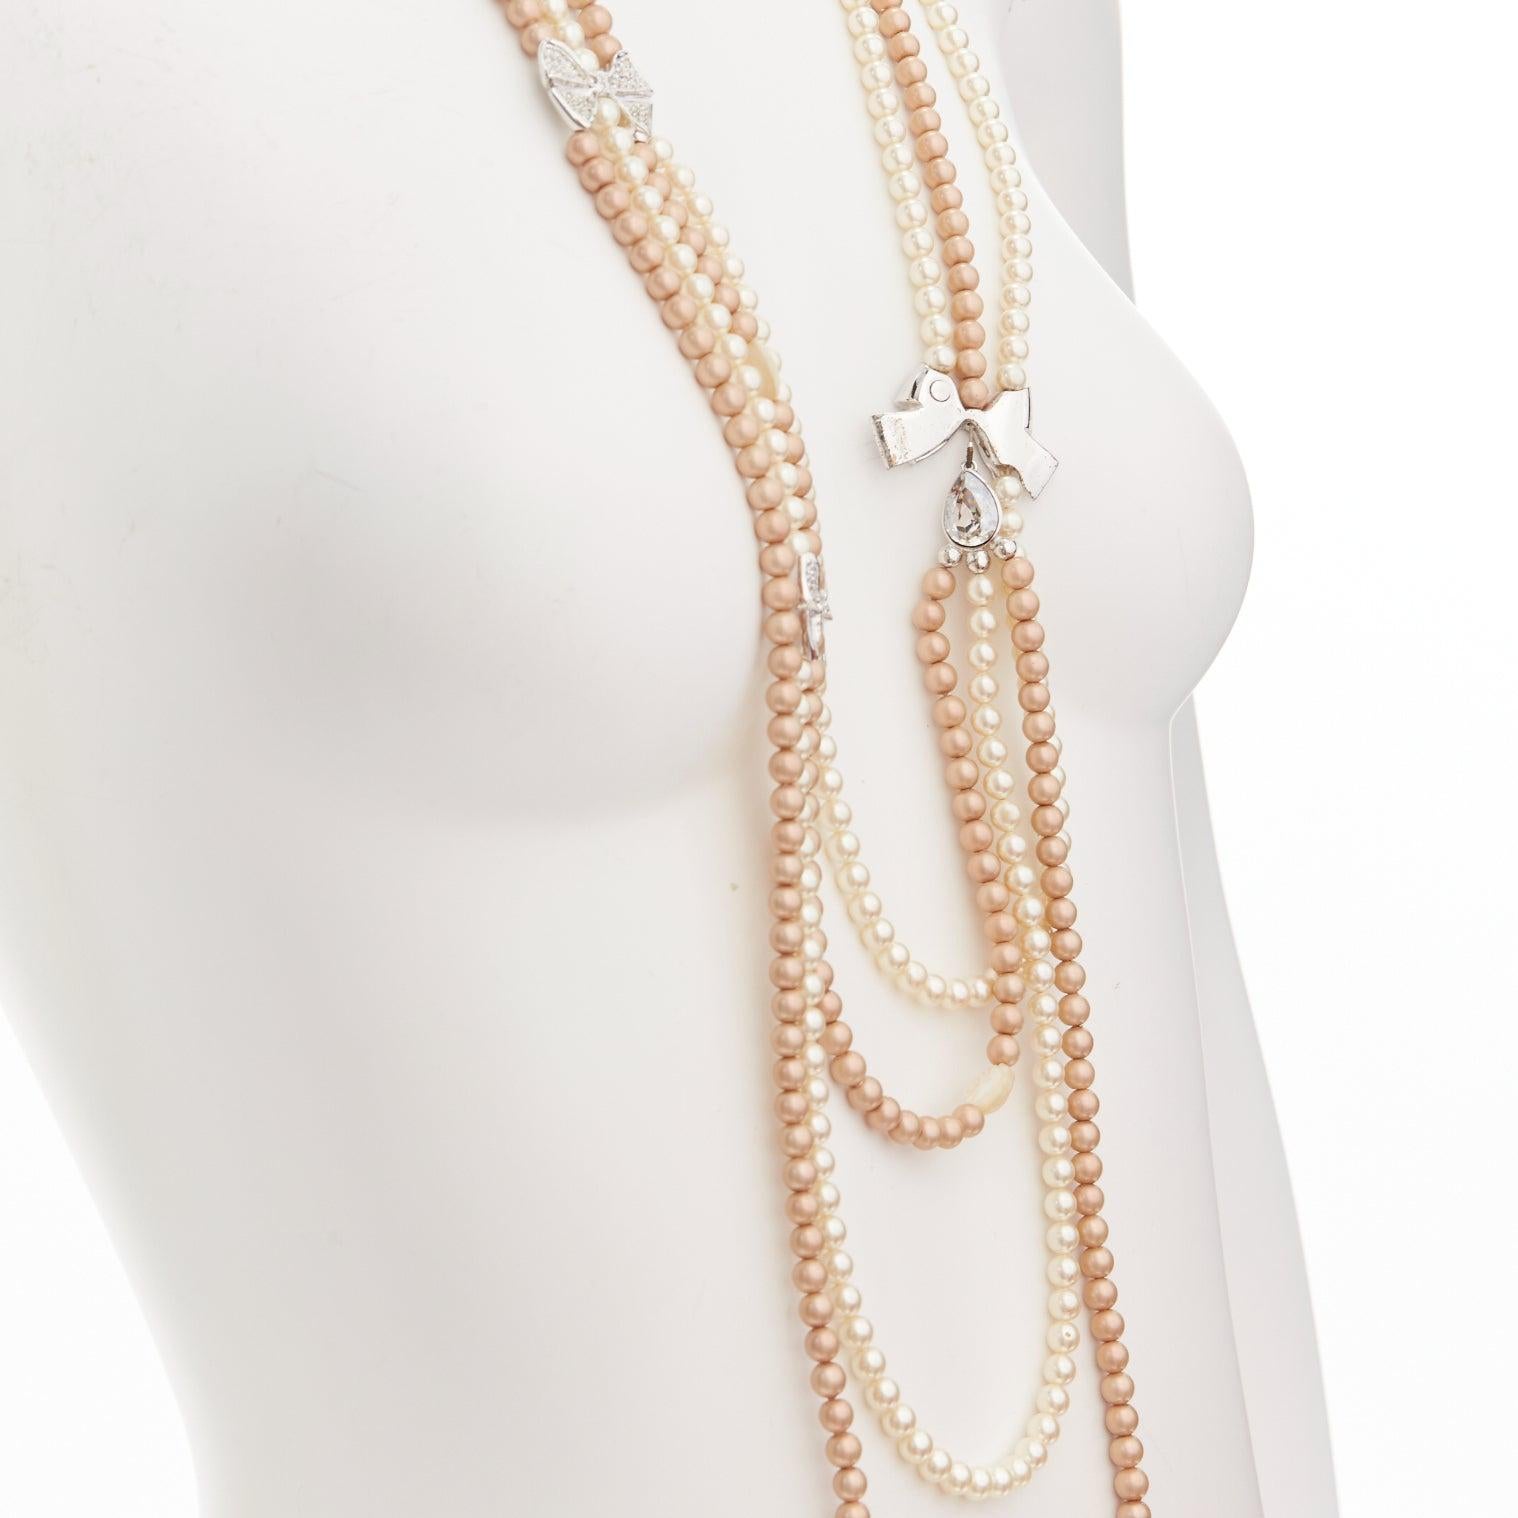 CHRISTIAN DIOR John Galliano Vintage silver crystal bow faux pearl long necklace
Reference: TGAS/D01024
Brand: Dior
Designer: John Galliano
Material: Faux Pearl, Metal
Color: Pearl, Silver
Pattern: Solid
Closure: Lobster Clasp
Extra Details: Silver